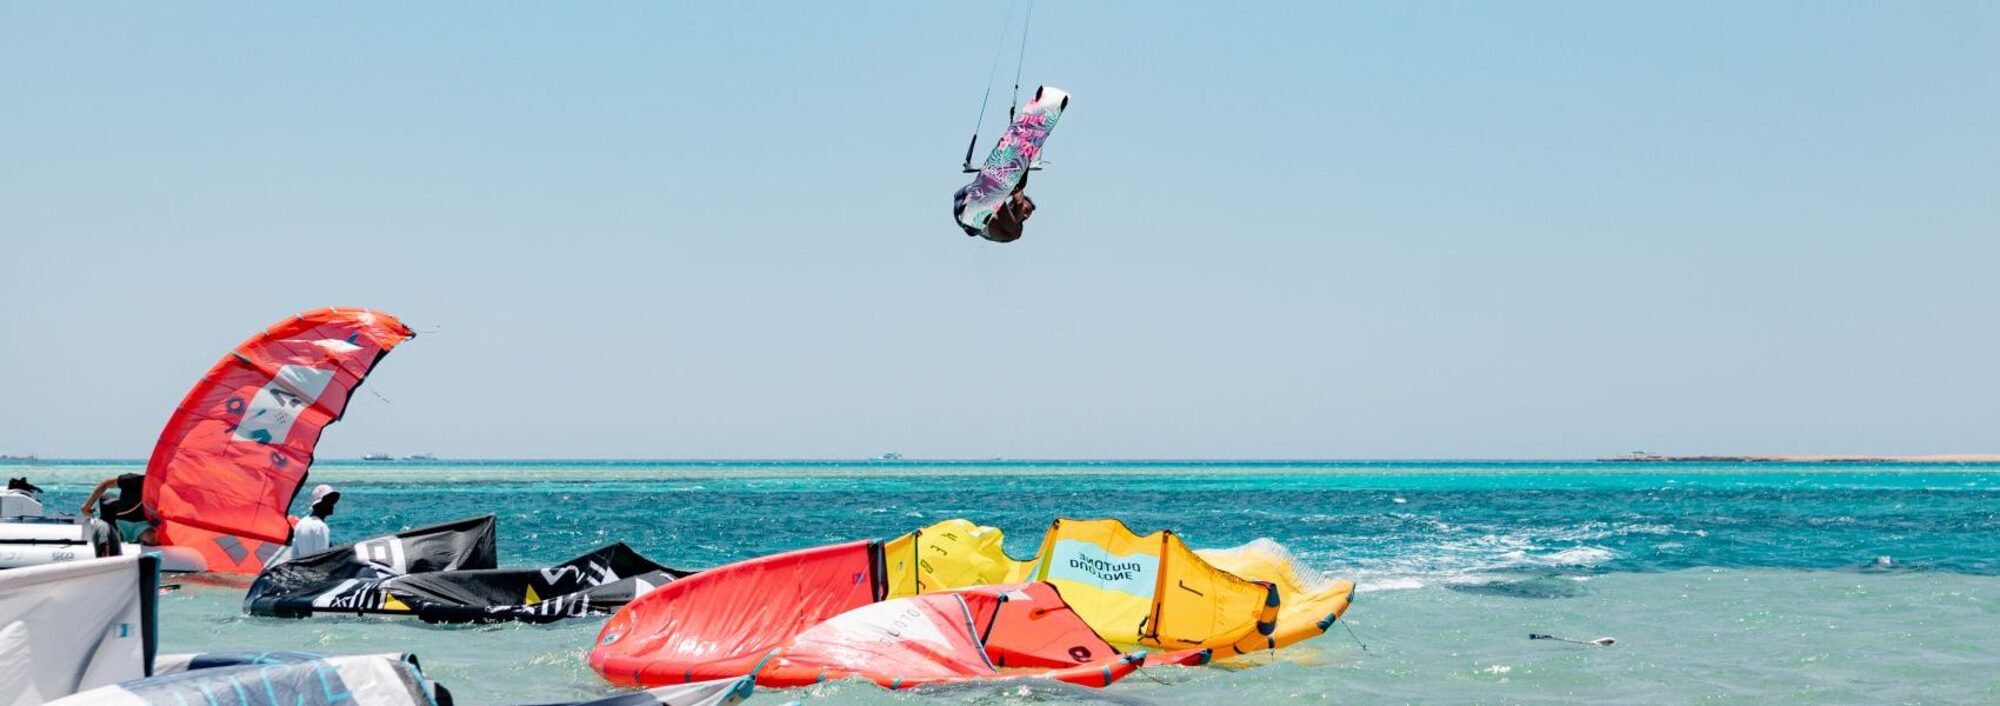 012-element-watersports-somabay